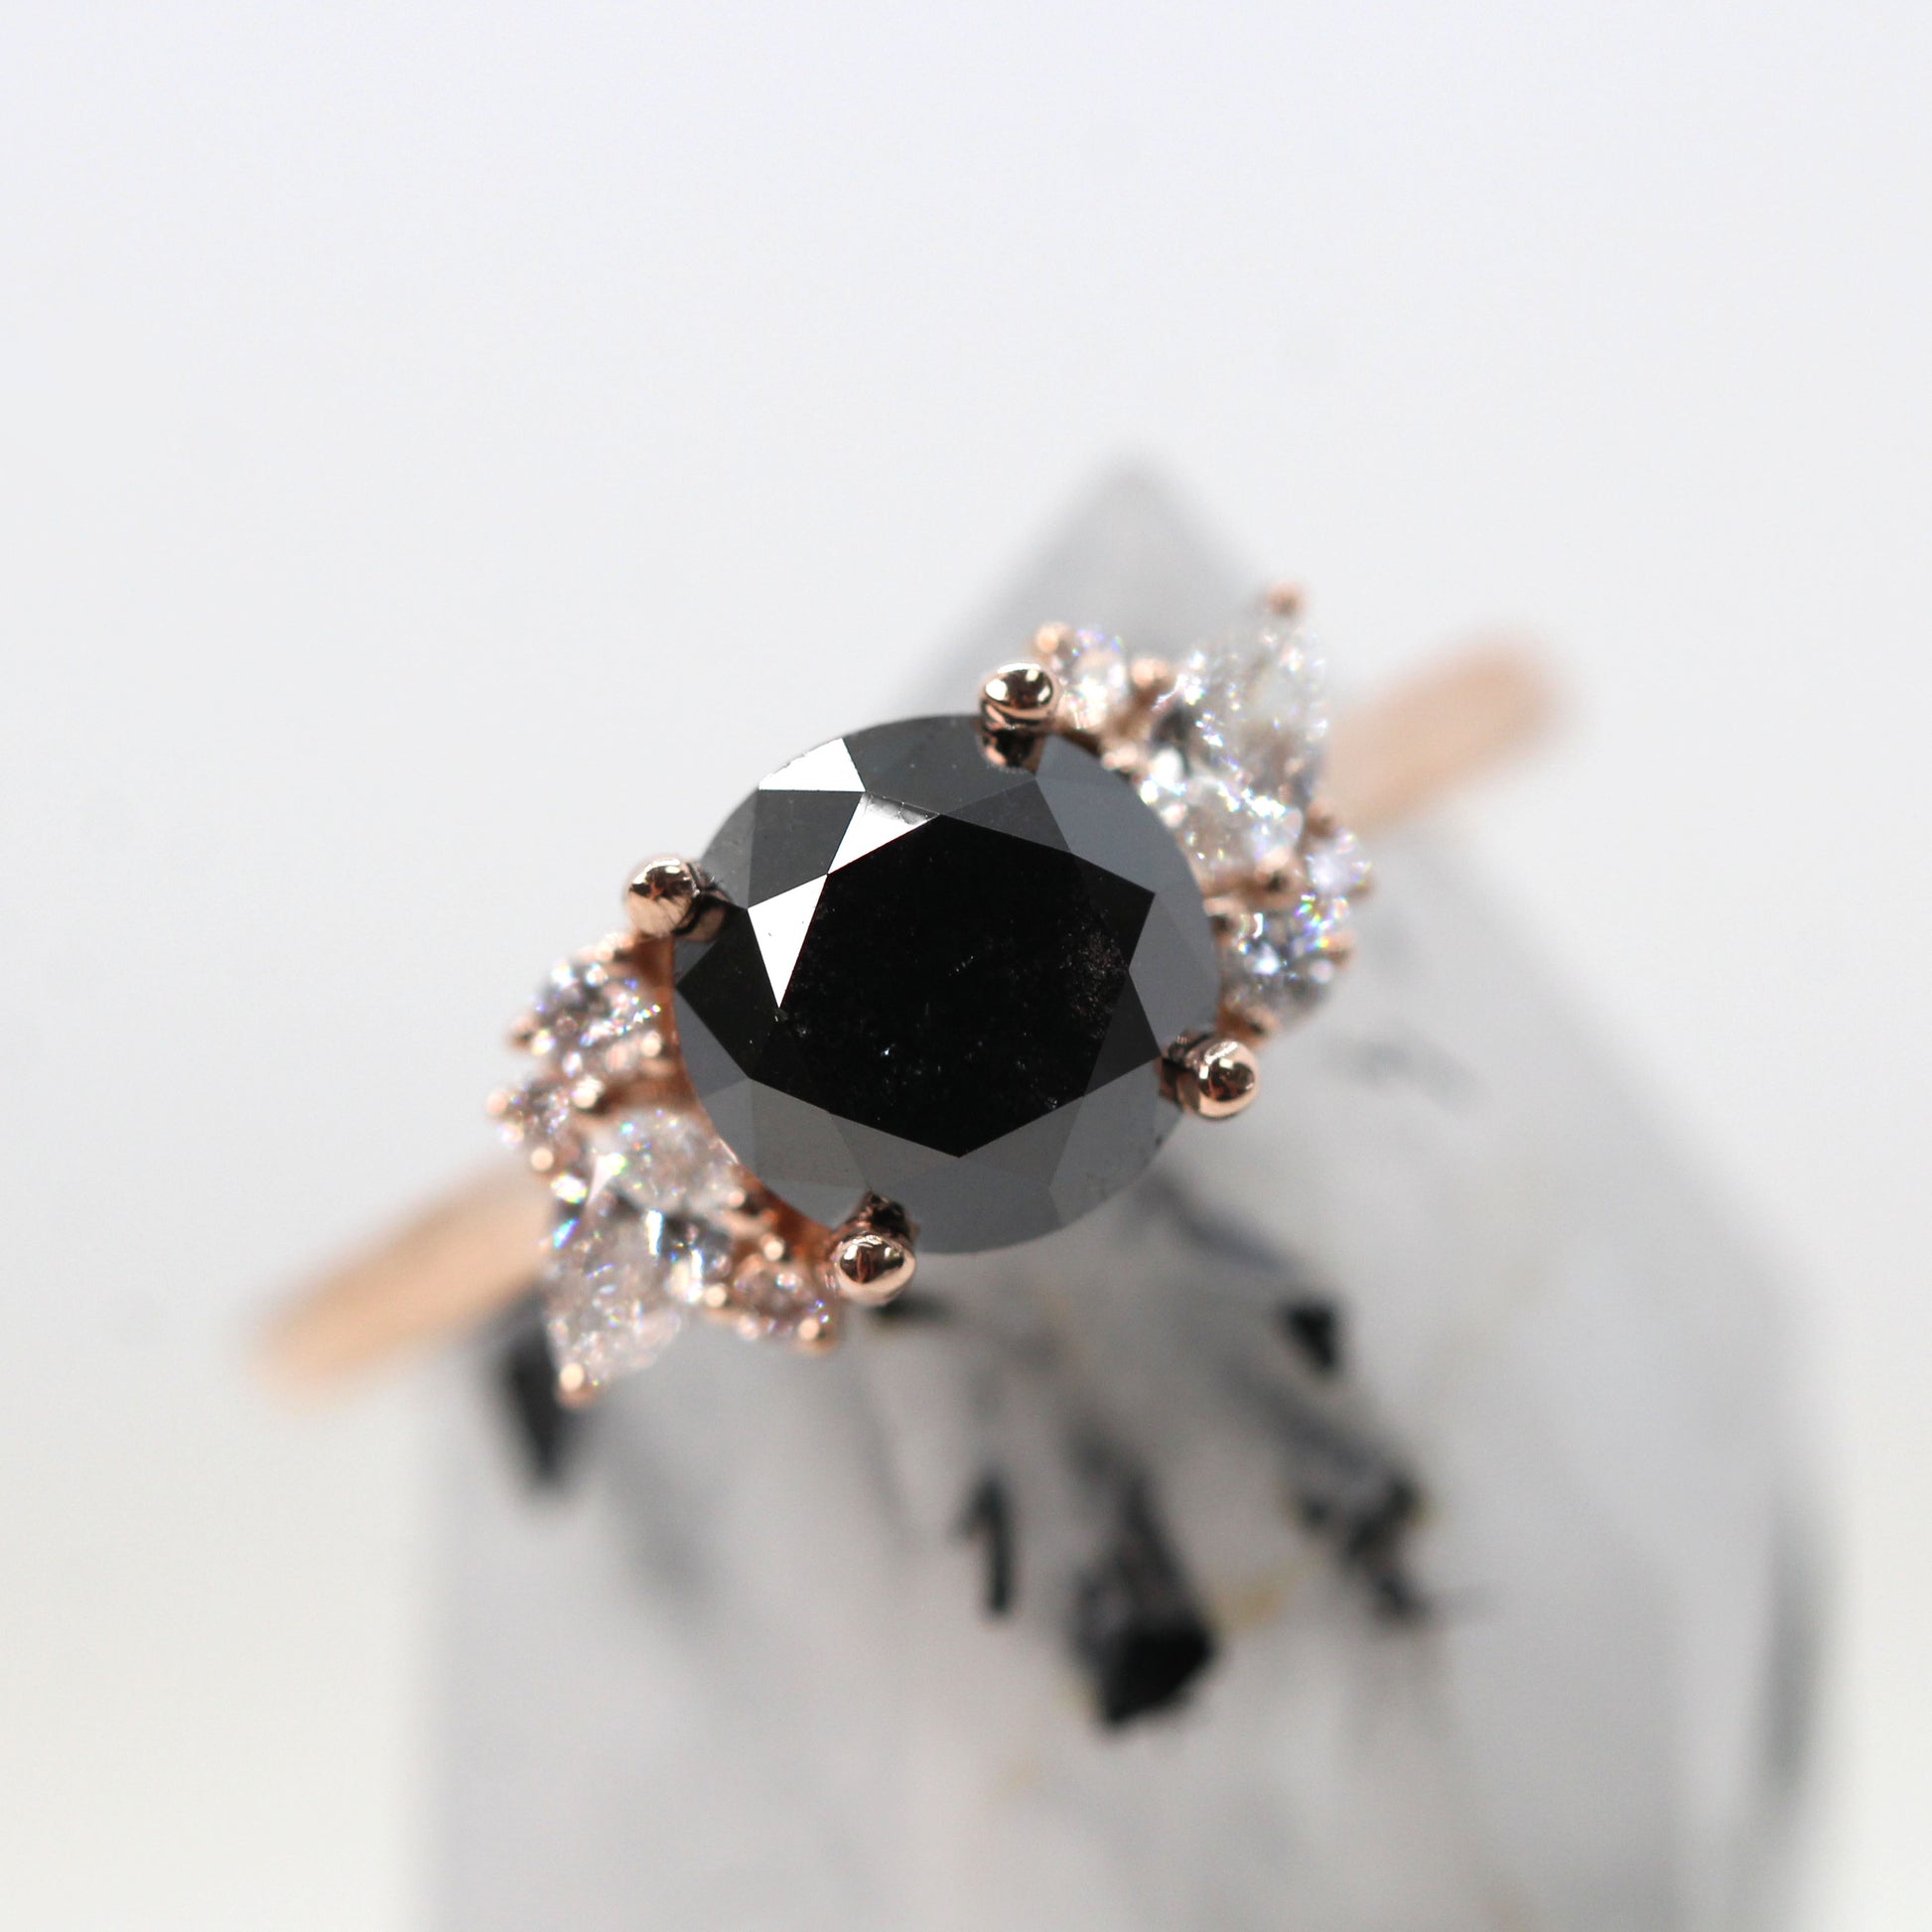 Sable Ring with a 2.20 Carat Round Black Celestial Diamond and White Accent Diamonds in 14k Rose Gold - Ready to Size and Ship - Midwinter Co. Alternative Bridal Rings and Modern Fine Jewelry